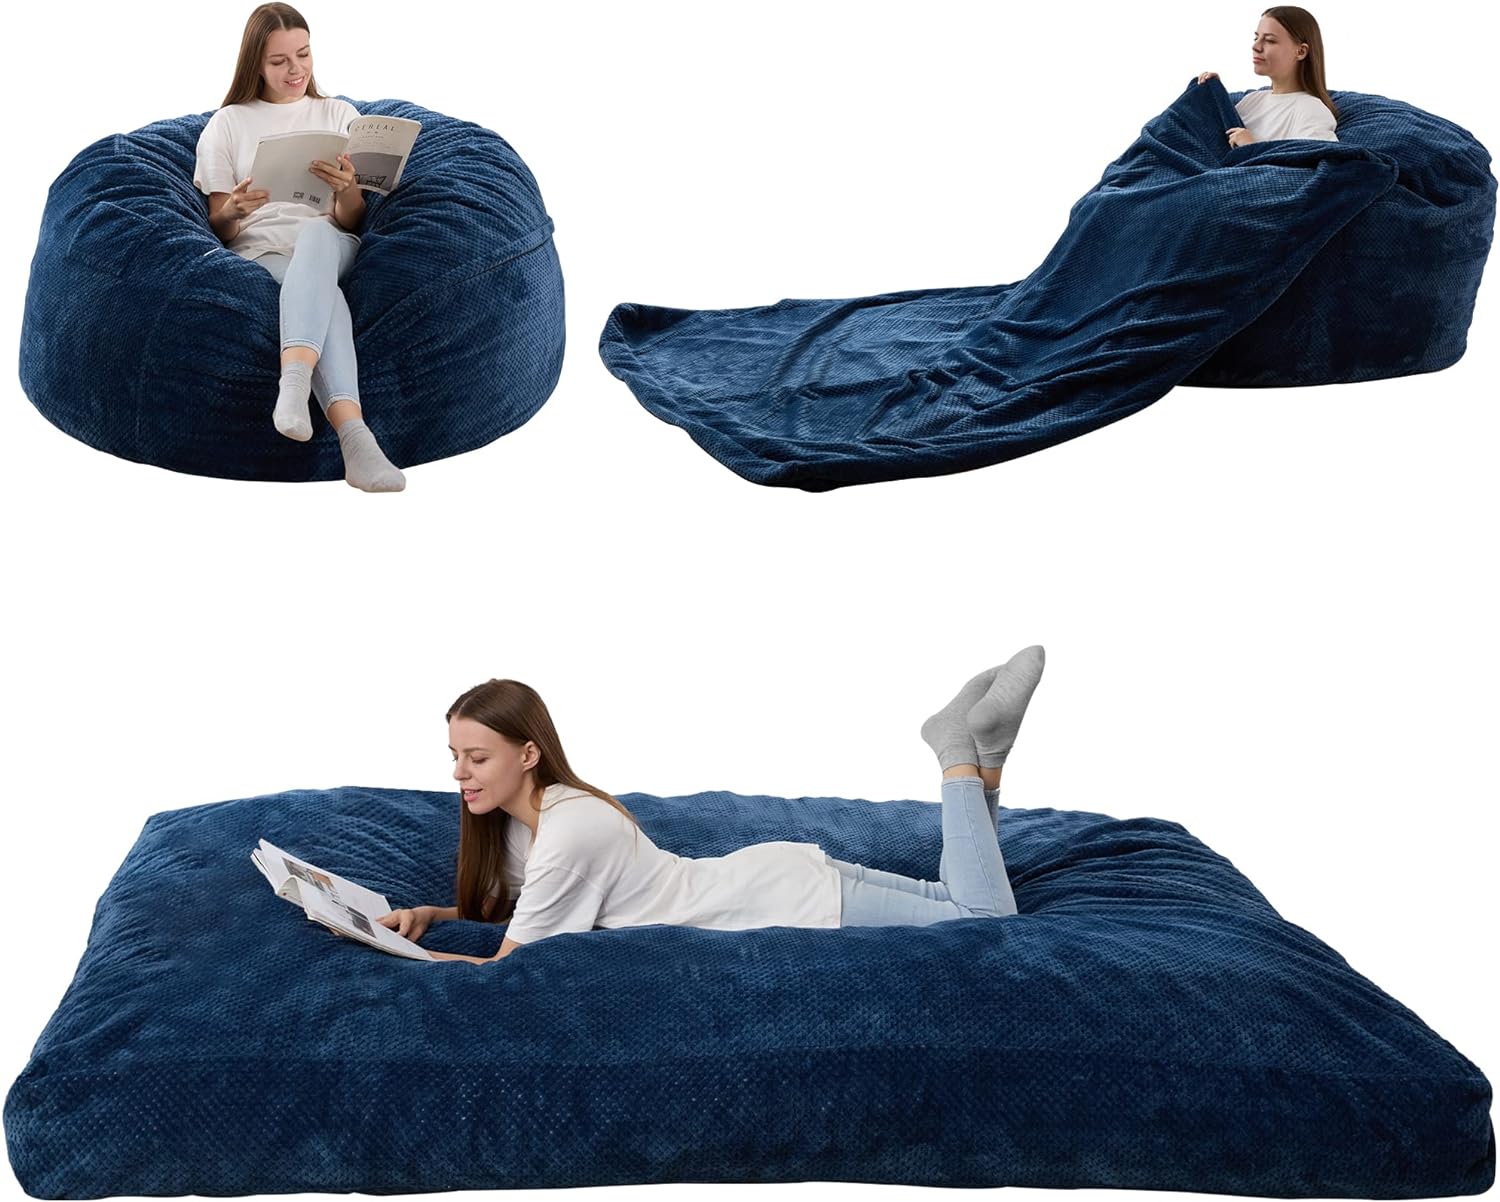 HABUTWAY Bean Bag Chair, Giant Bean Bag Chair with Washable Chenille Cover Ultra Soft, Convertible Bean Bag from Chair to Mattress, Huge Chenille Bean Bags for Adult, Couples, Family - Royal - Queen